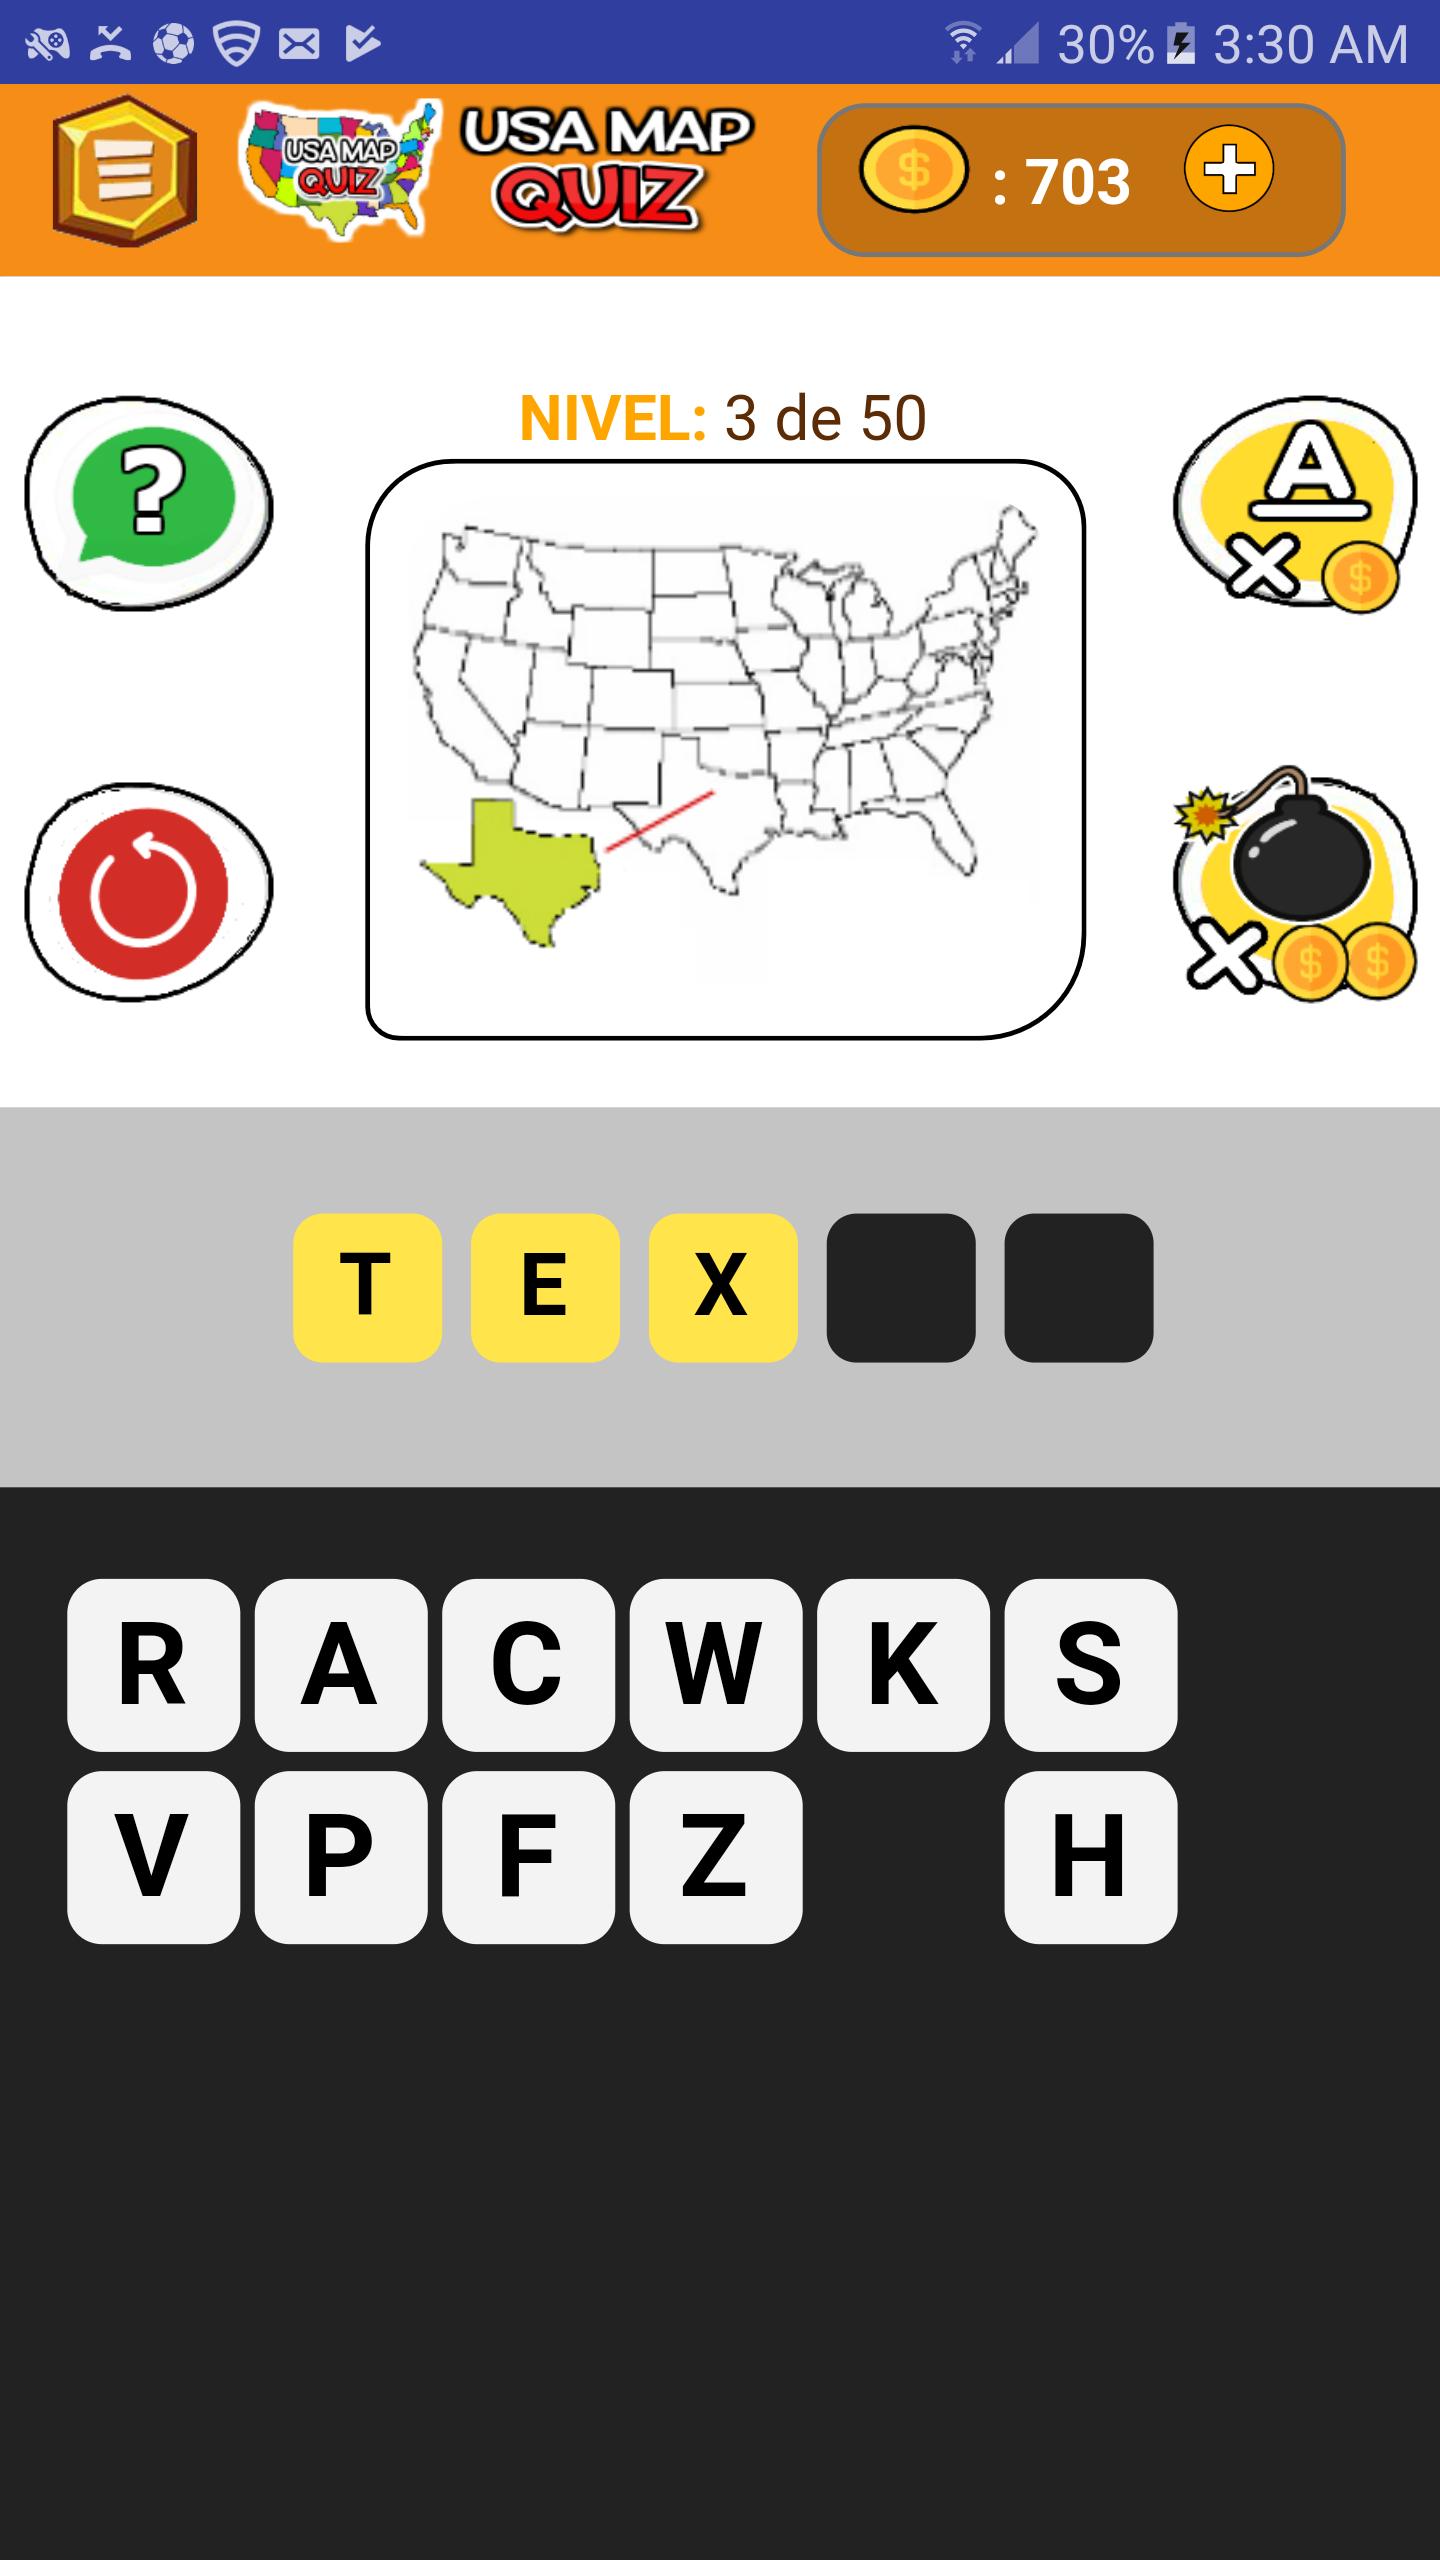 MAP QUIZ The US State Game for Android - APK